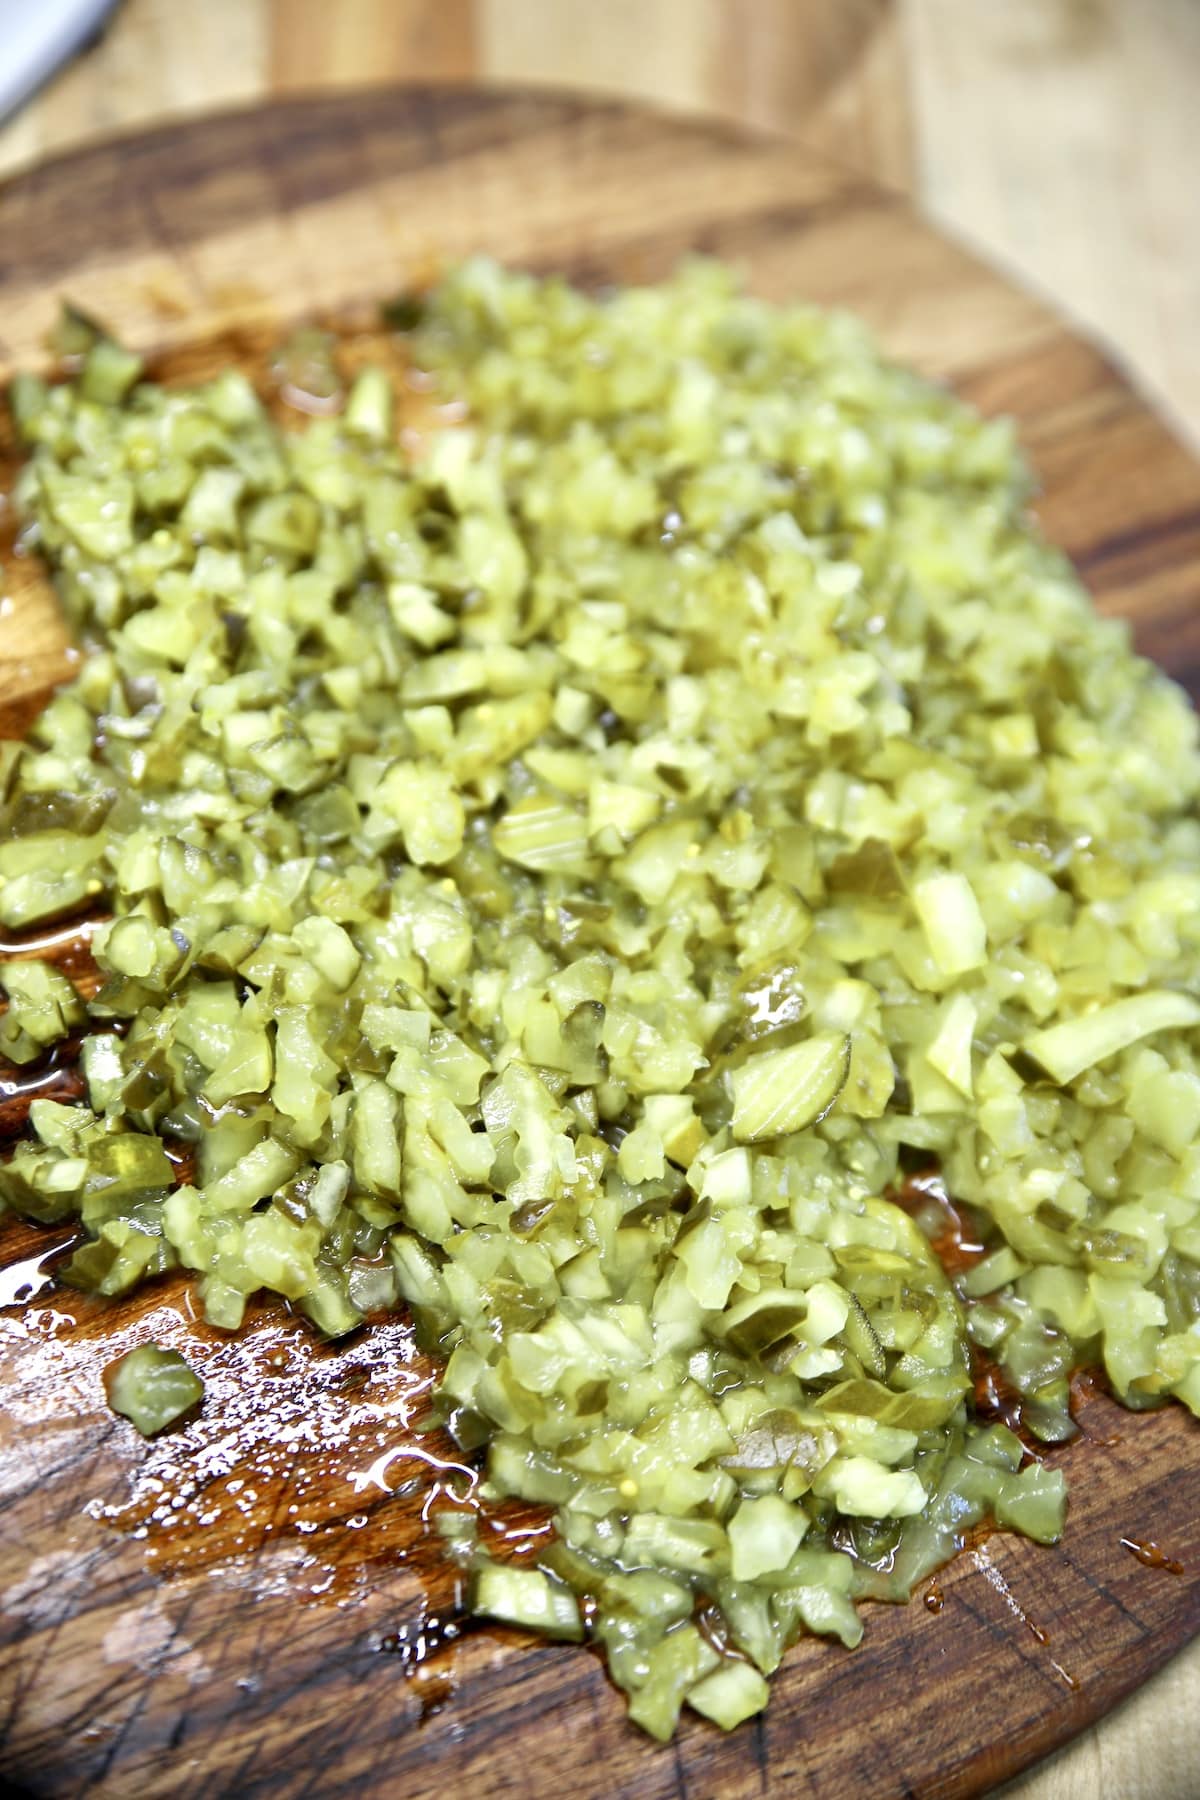 Cutting board with chopped pickles.